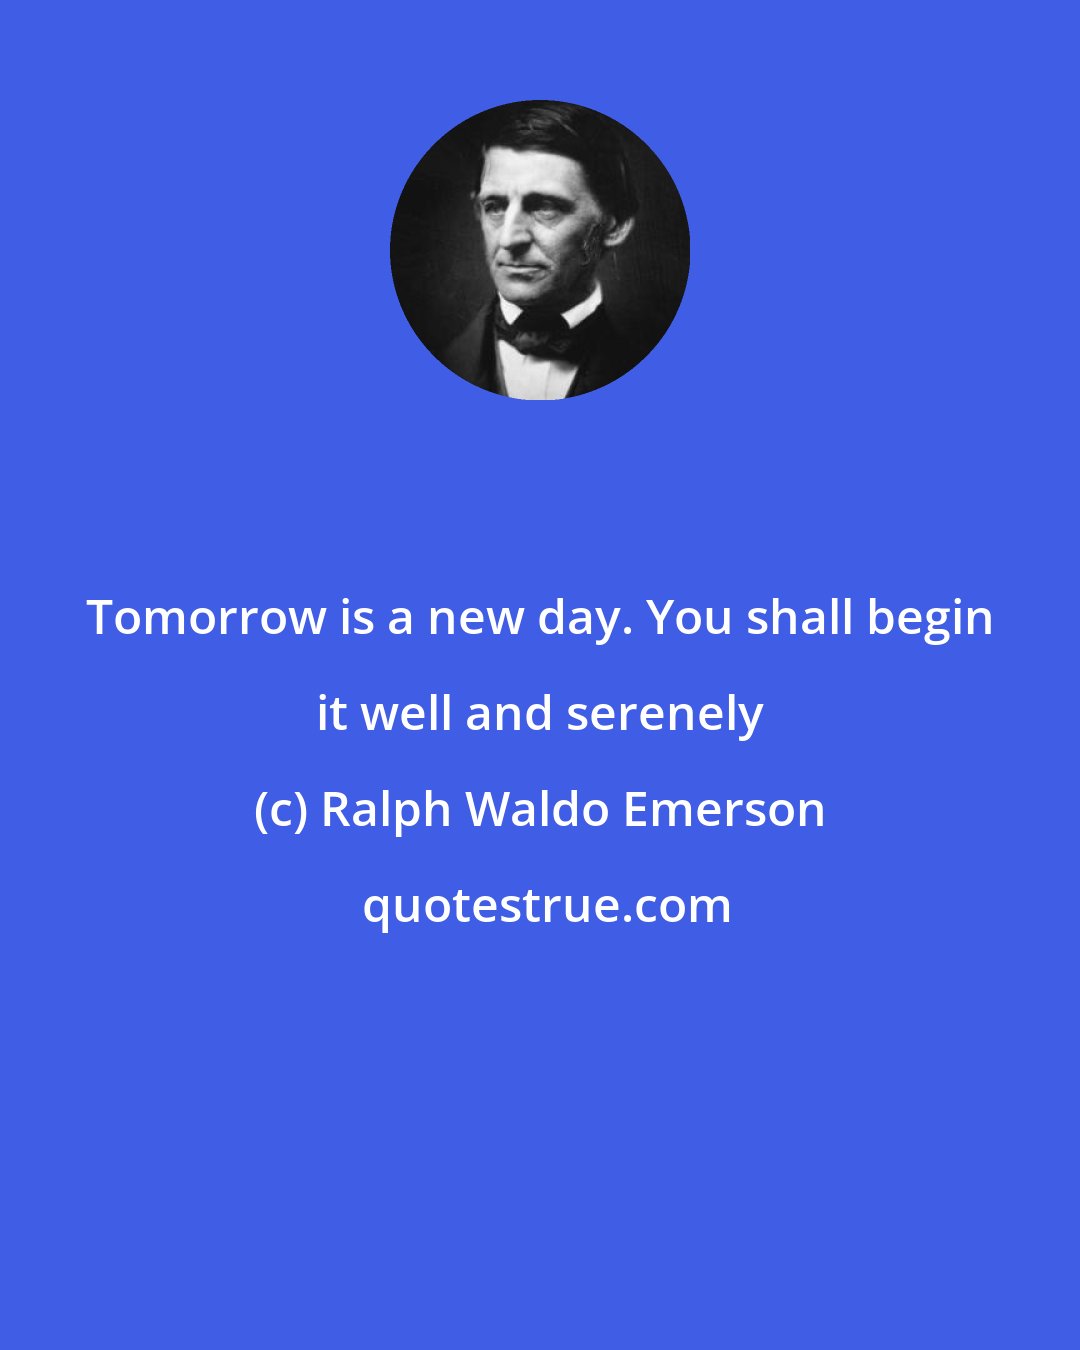 Ralph Waldo Emerson: Tomorrow is a new day. You shall begin it well and serenely